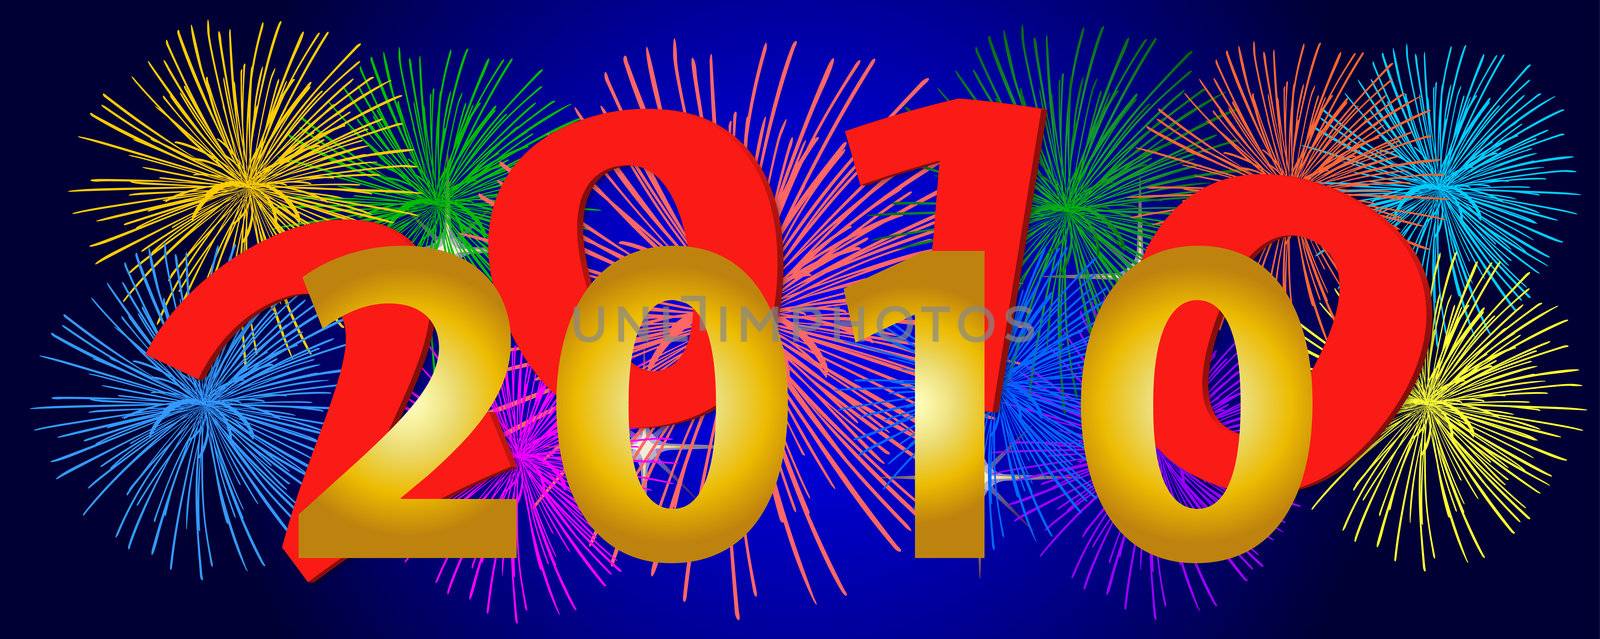 happy new year 2010 by peromarketing